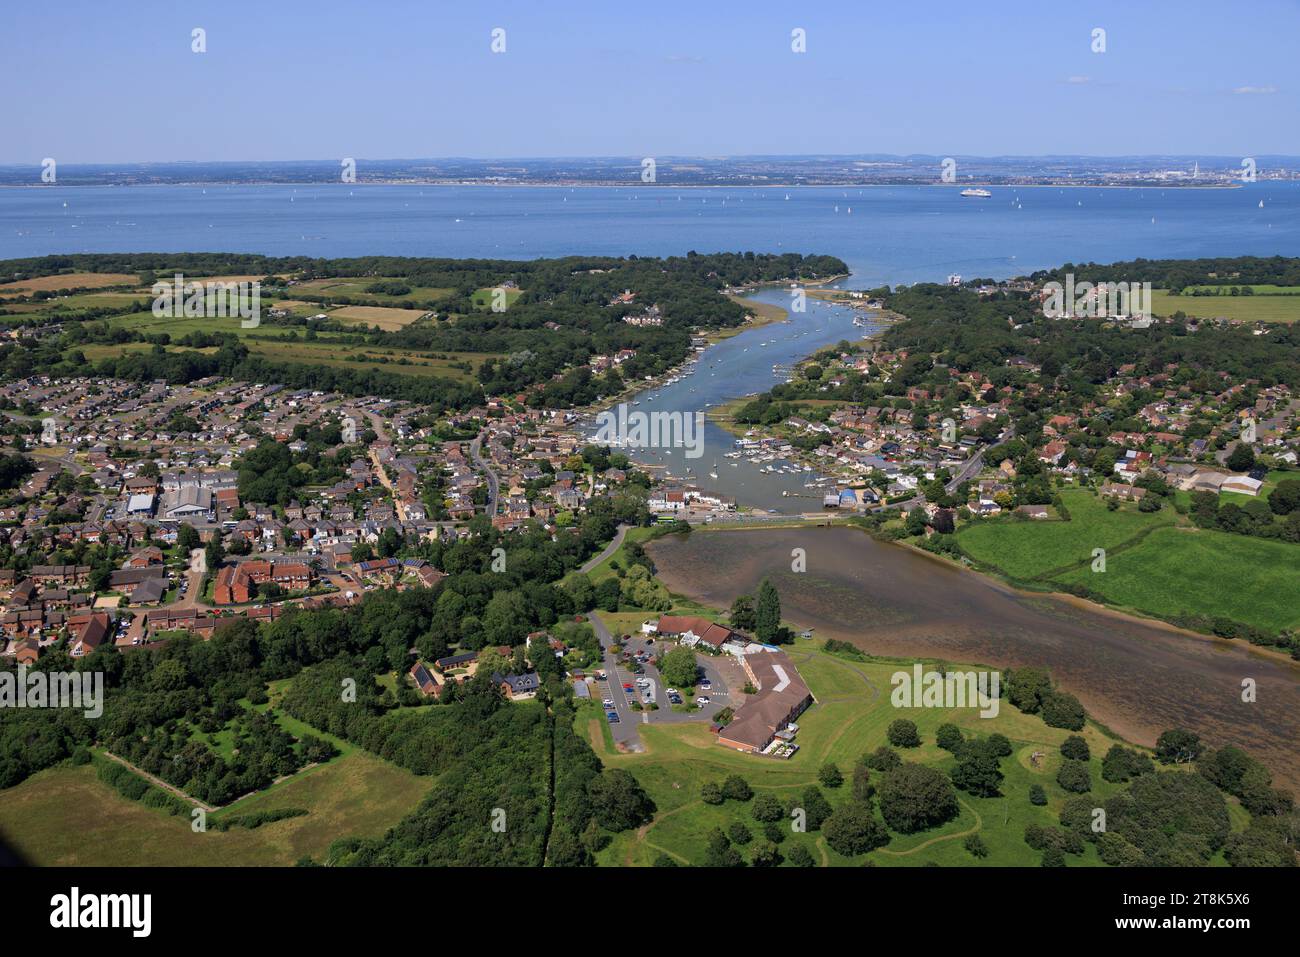 Aerial view of Fishbourne and the town of Wootton Bridge overlooking Wootton Creek on the Isle of Wight, accross The Solent,  Portsmouth and Lee-On-So Stock Photo